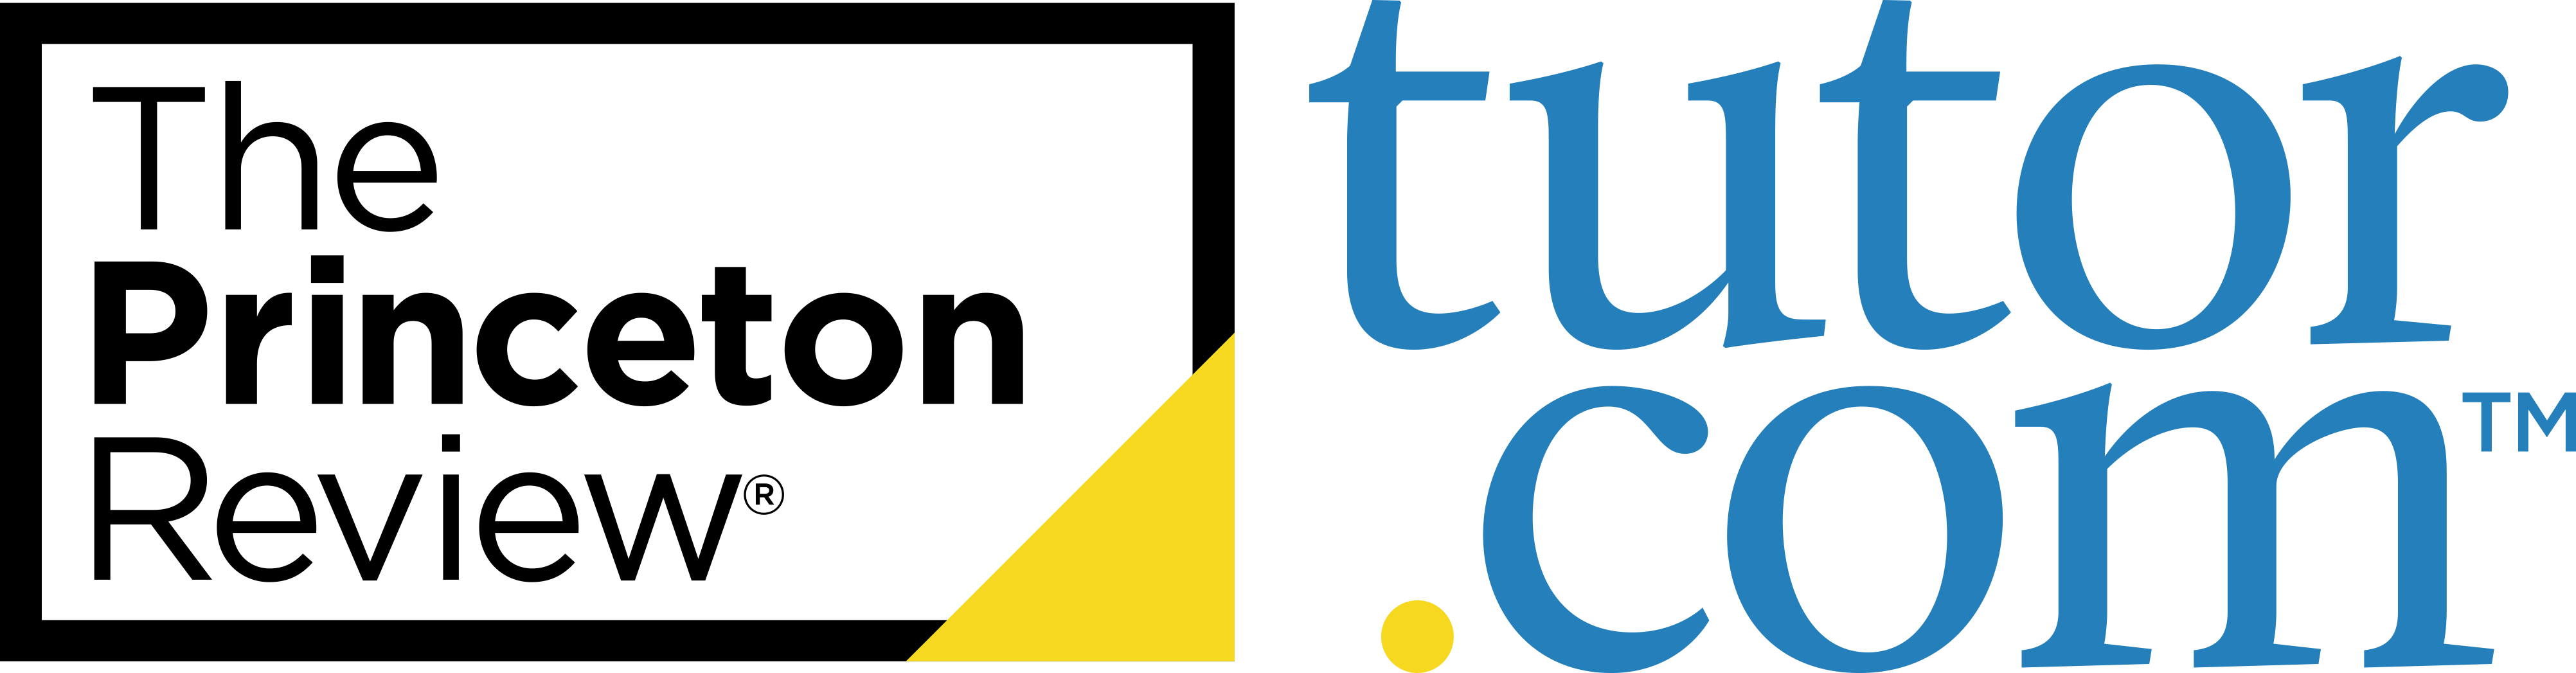 The Princeton Review and Tutor.com Helping Students Accelerate Learning  With Targeted Summer Offerings